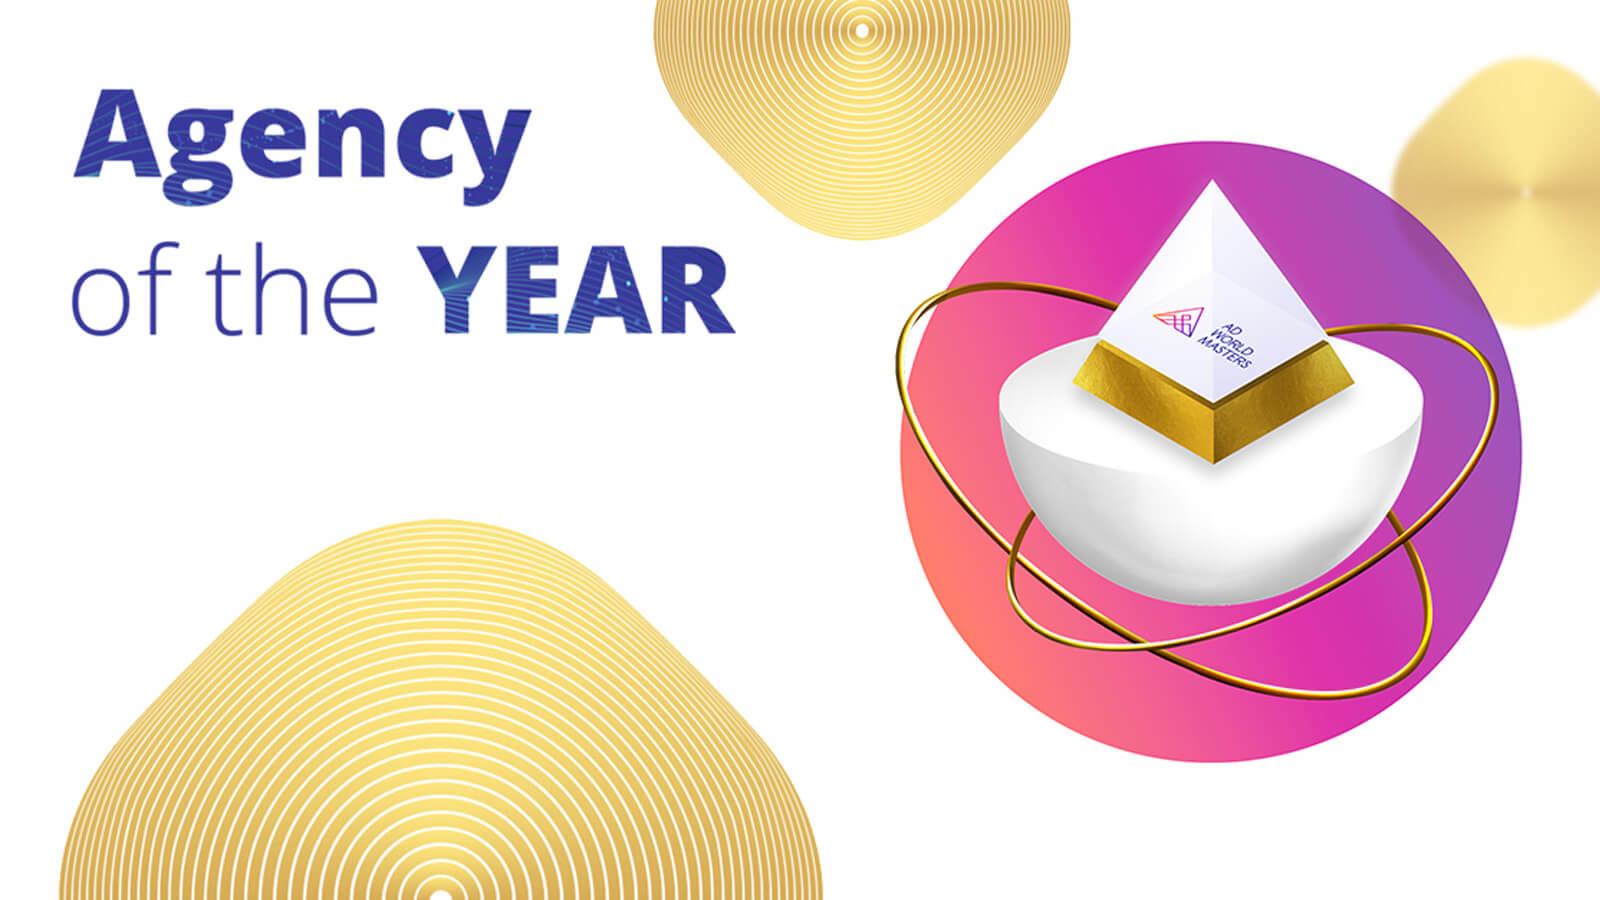 Agency of the year 2021 - Results